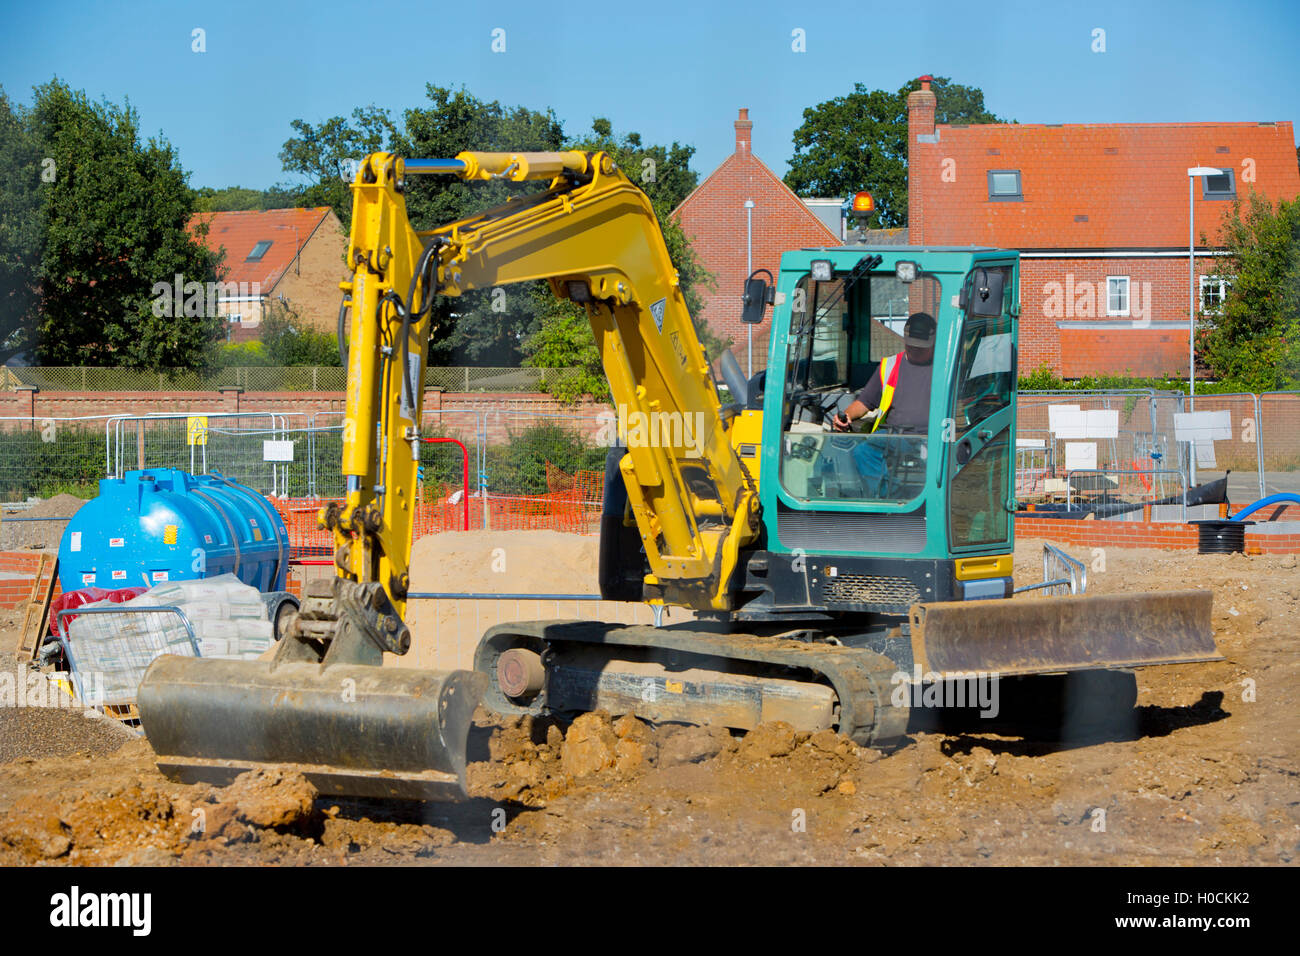 A digger working on a building site Stock Photo